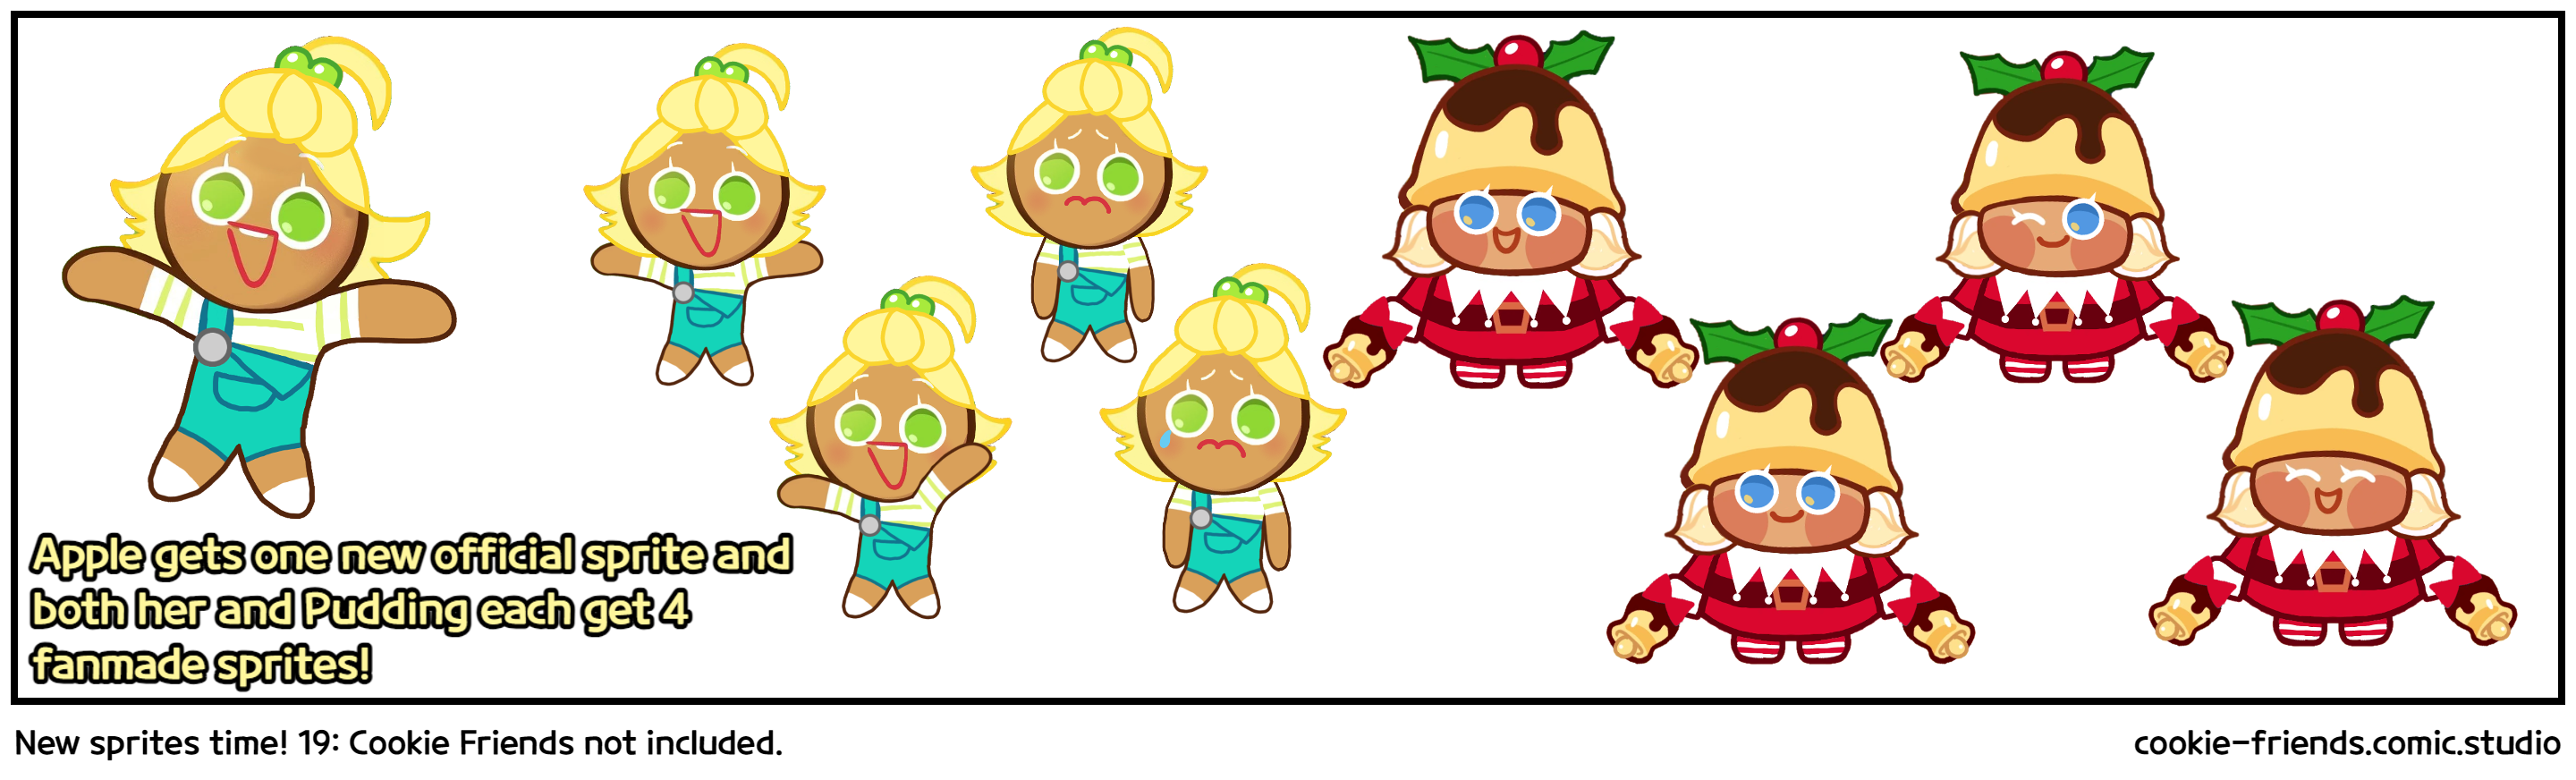 New sprites time! 19: Cookie Friends not included.